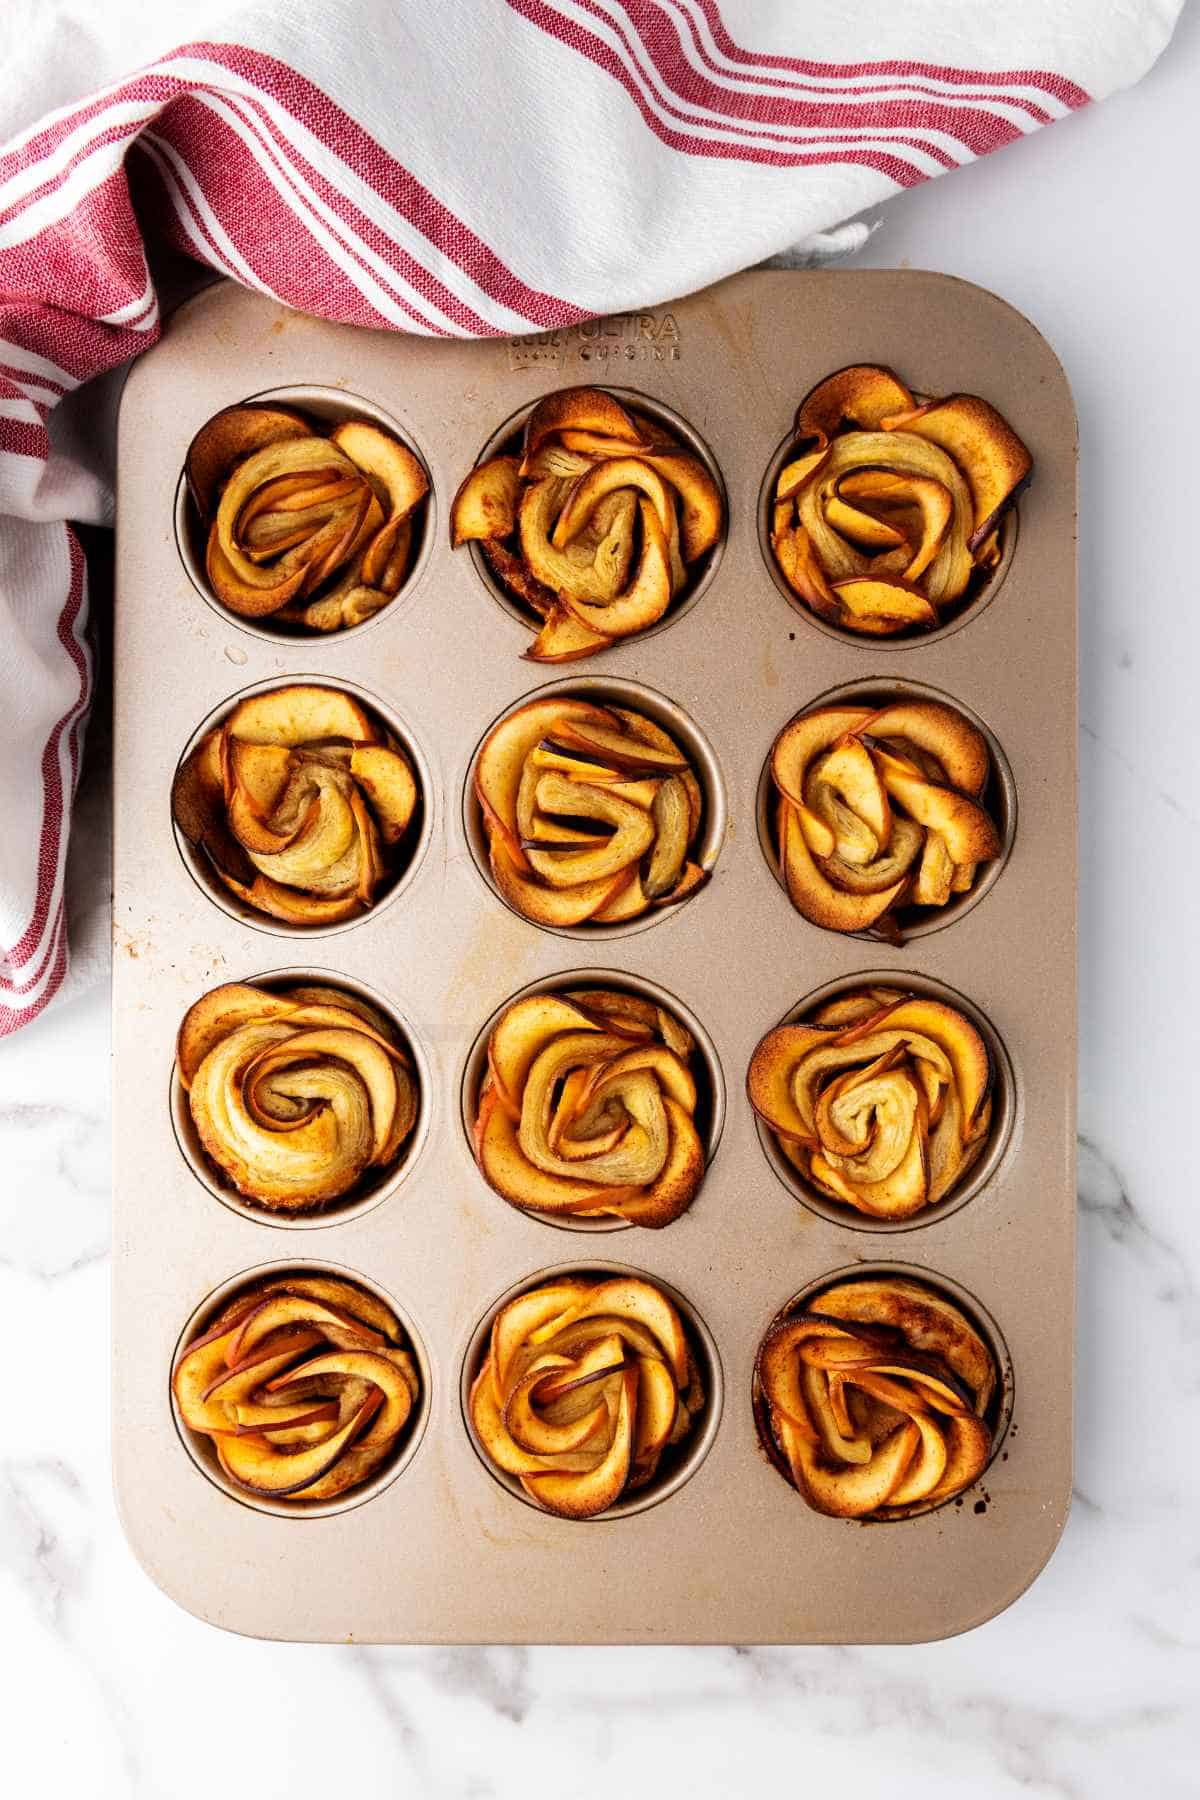 baked puff pastry apple roses in a muffin pan.